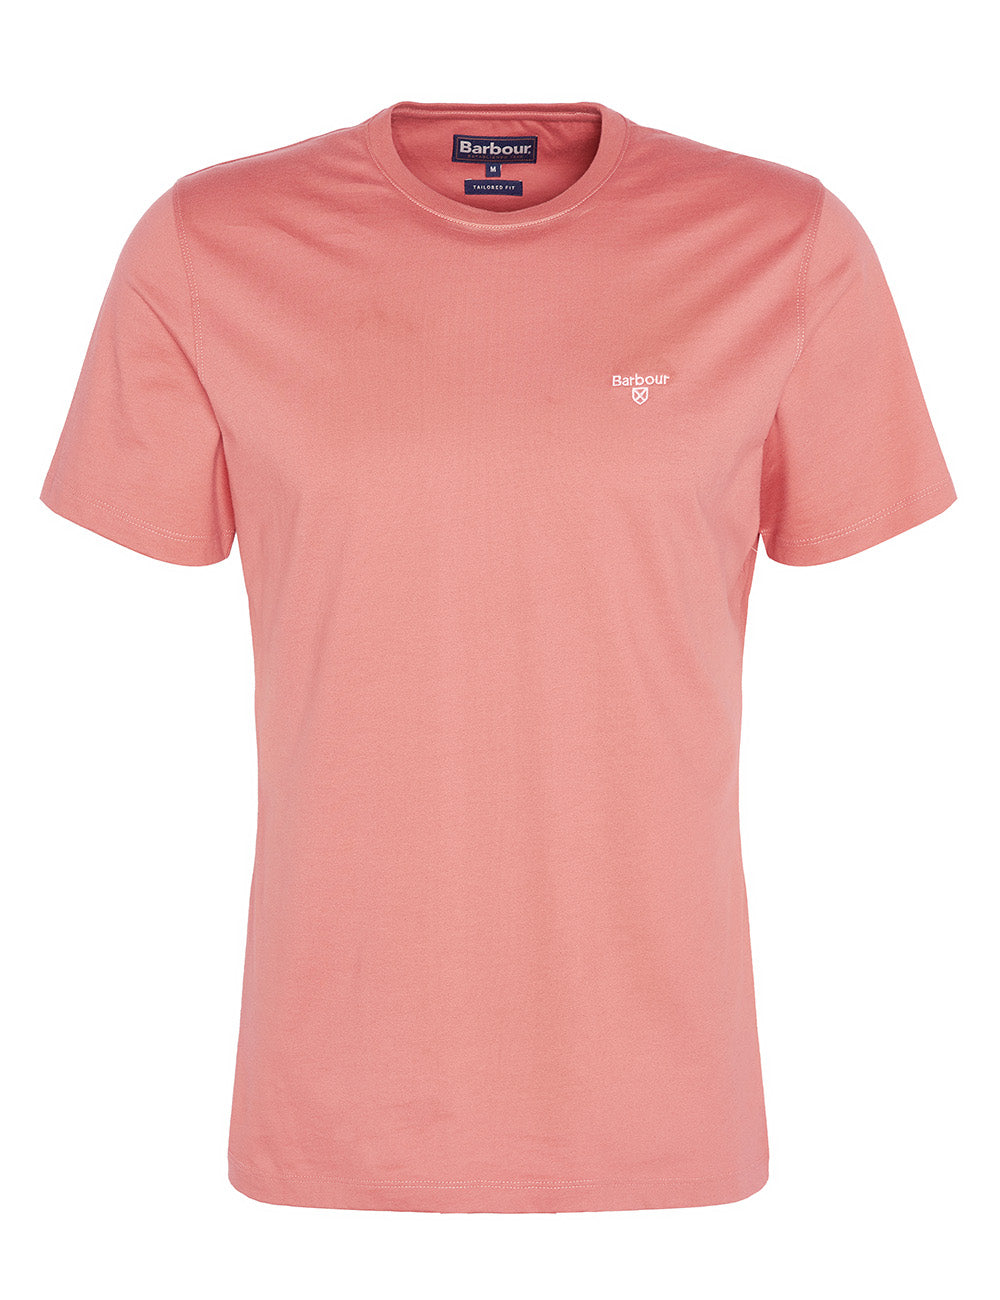 Barbour Sports T-Shirt - Pink Clay